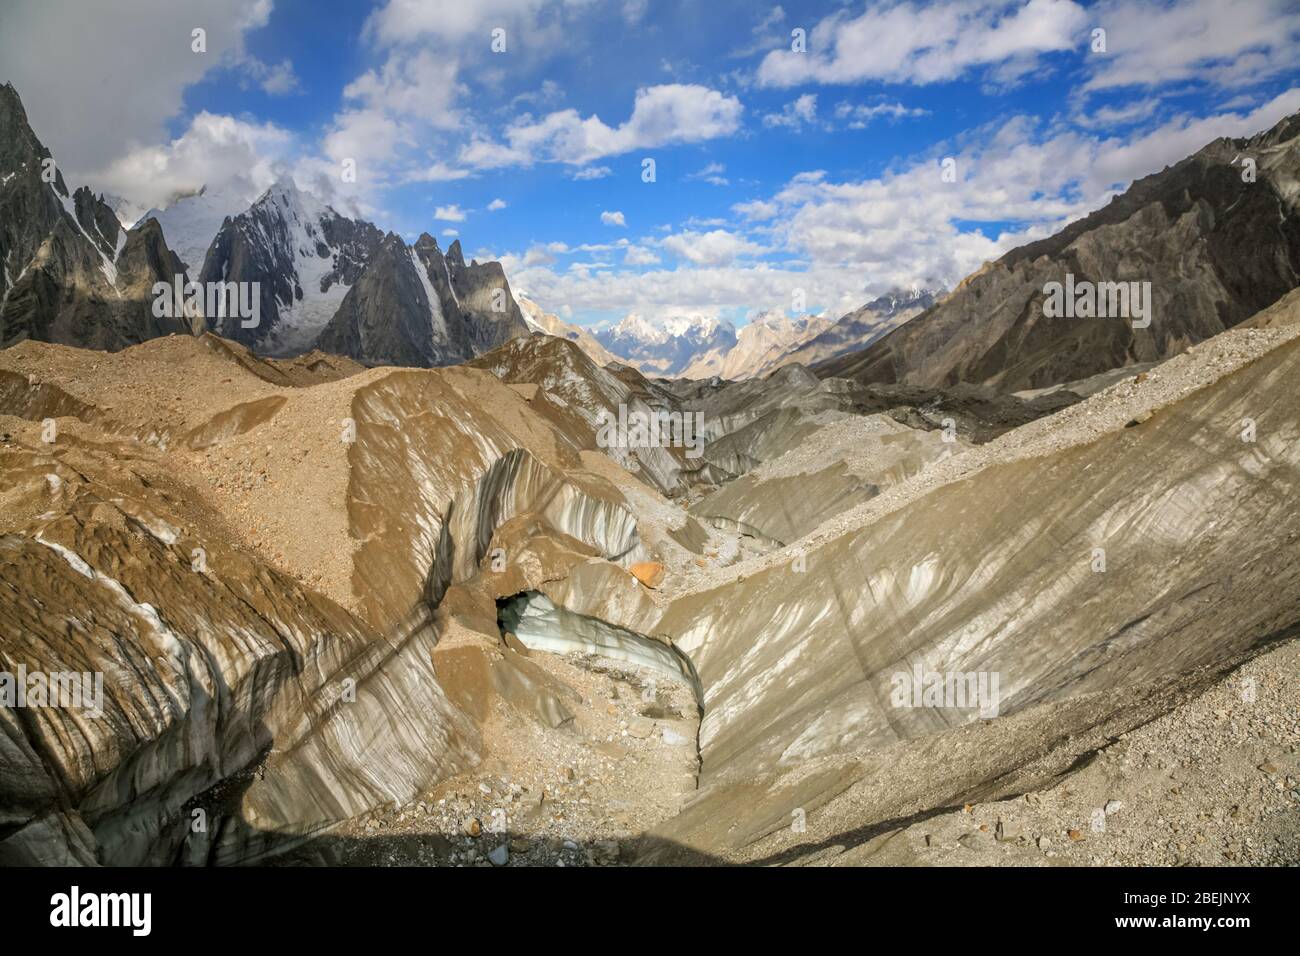 Looking West down the Baltoro Glacier from Concordia, in the Karakoram Mountains of Northern Pakistan. Stock Photo